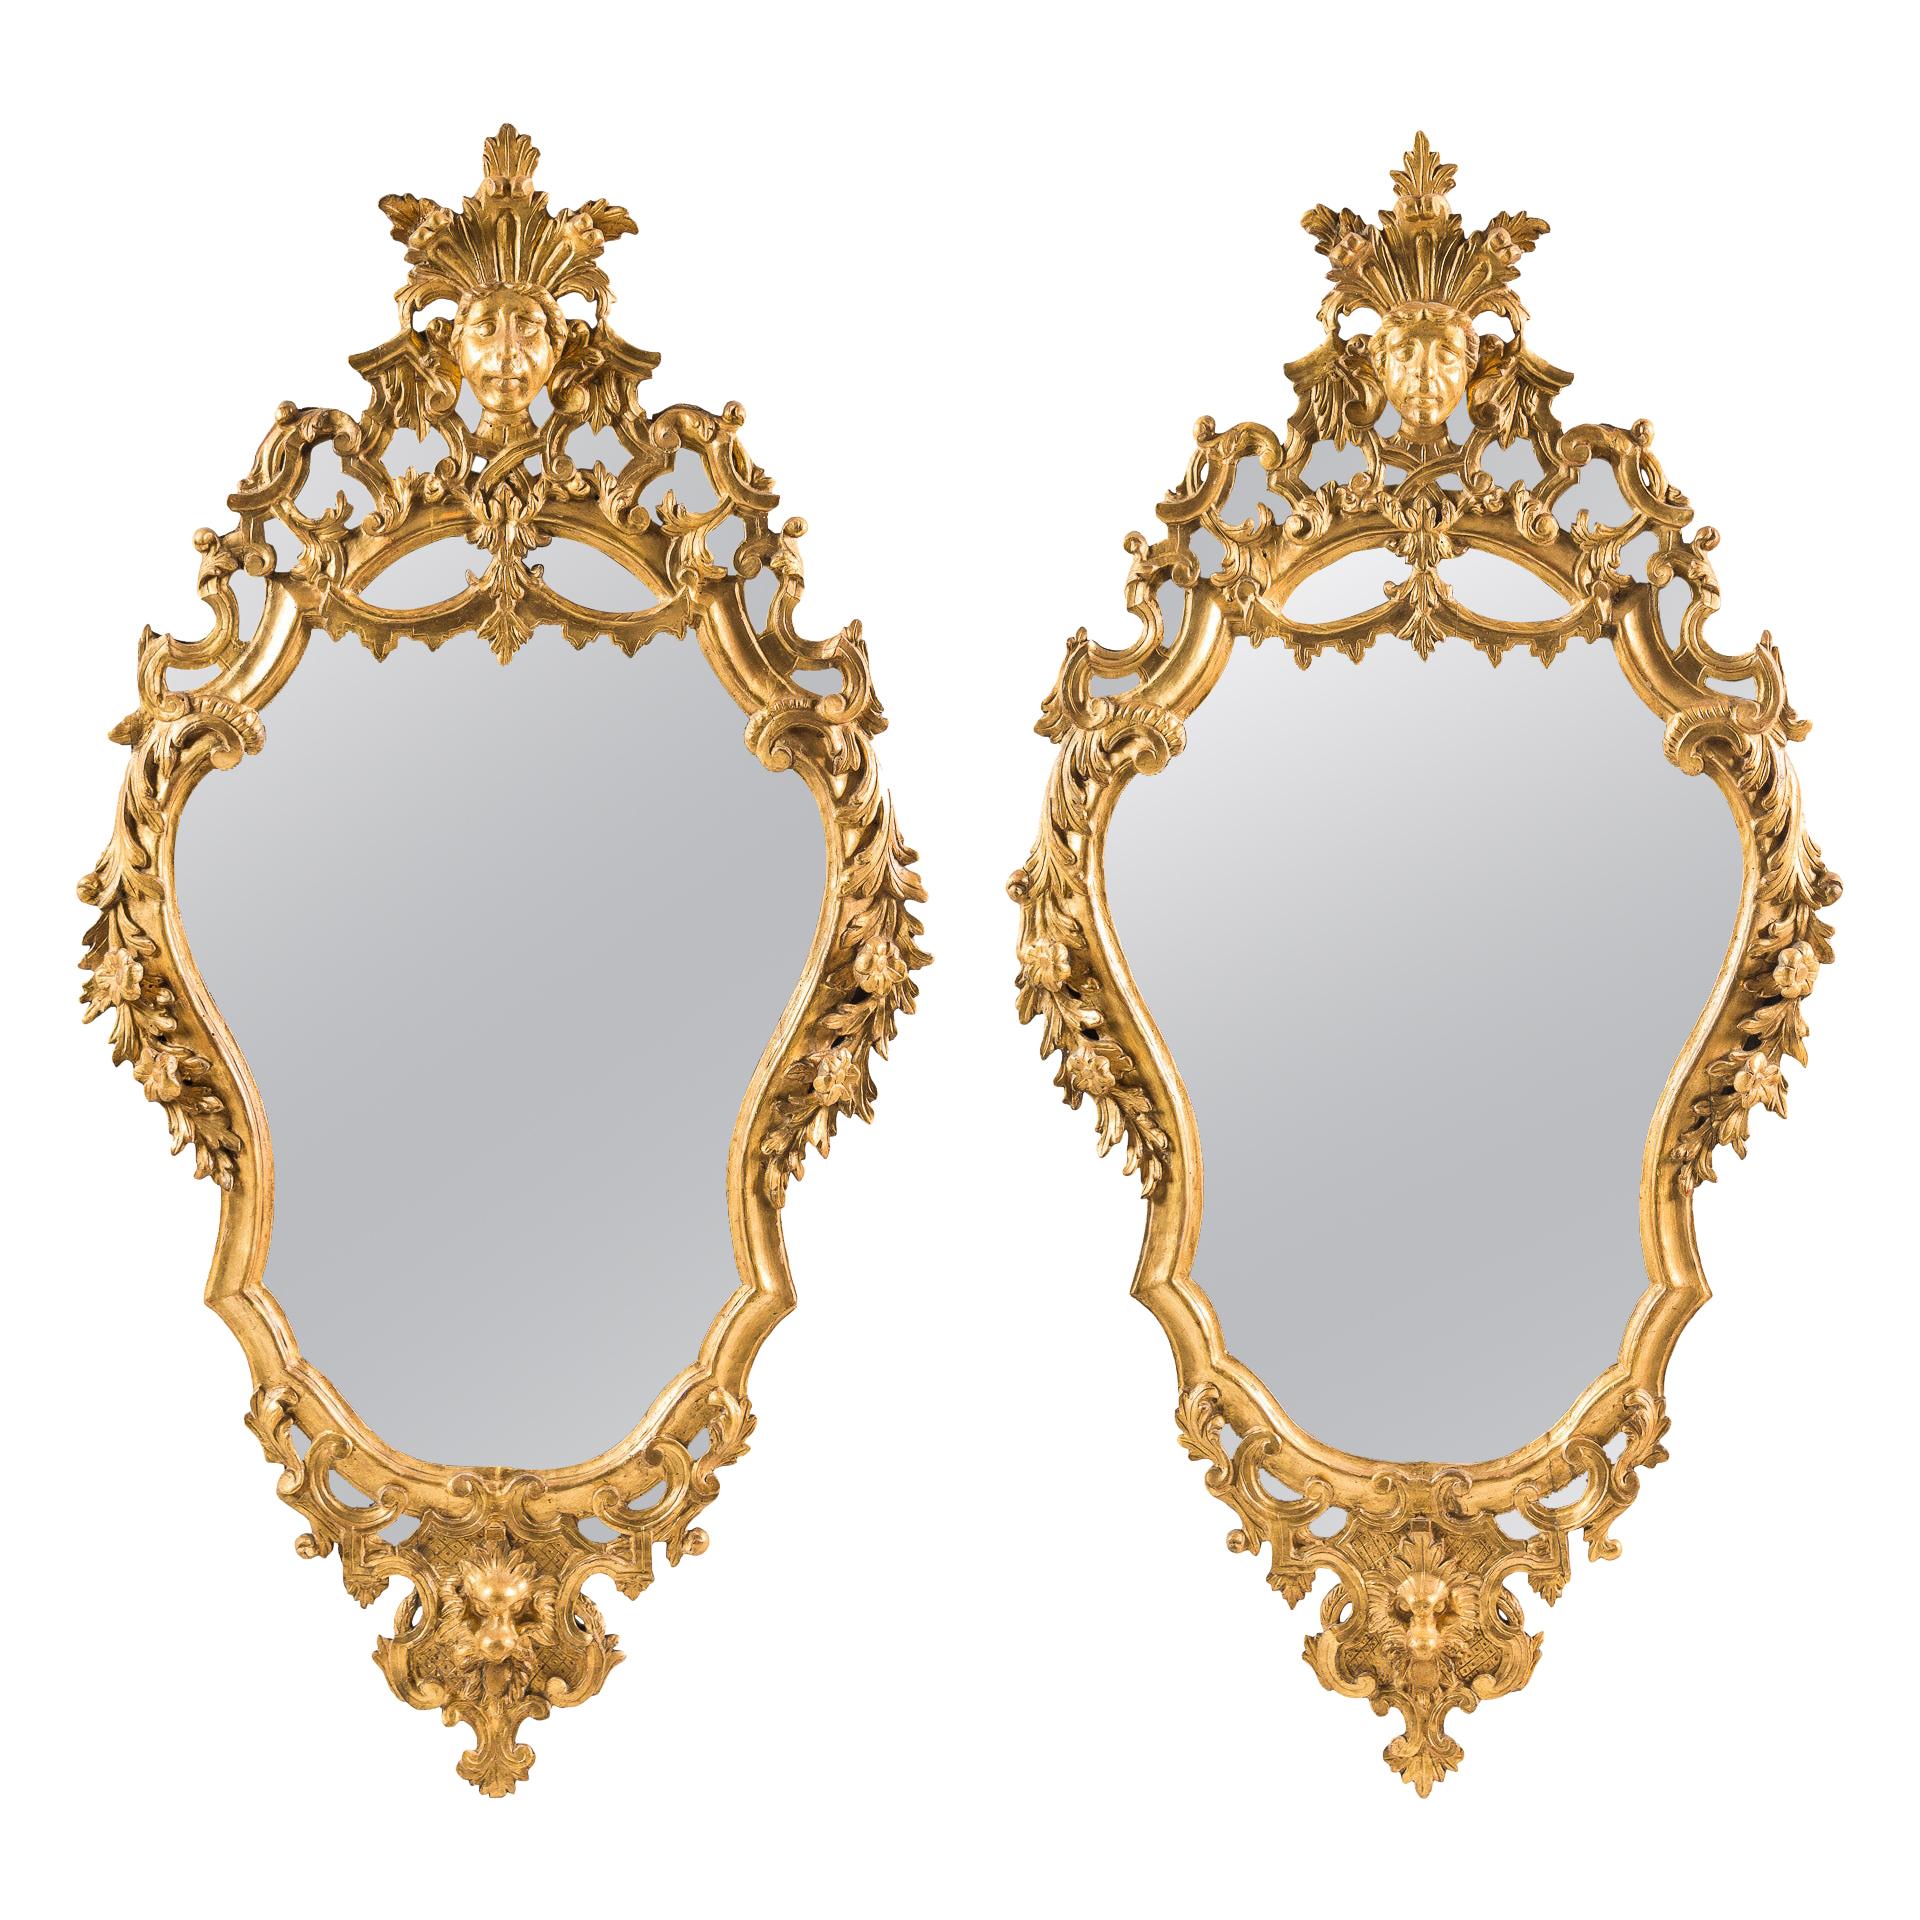 Pair of Italian Carved Gilded Wood Mirrors. Rome 18th Century, Venice Rococo For Sale